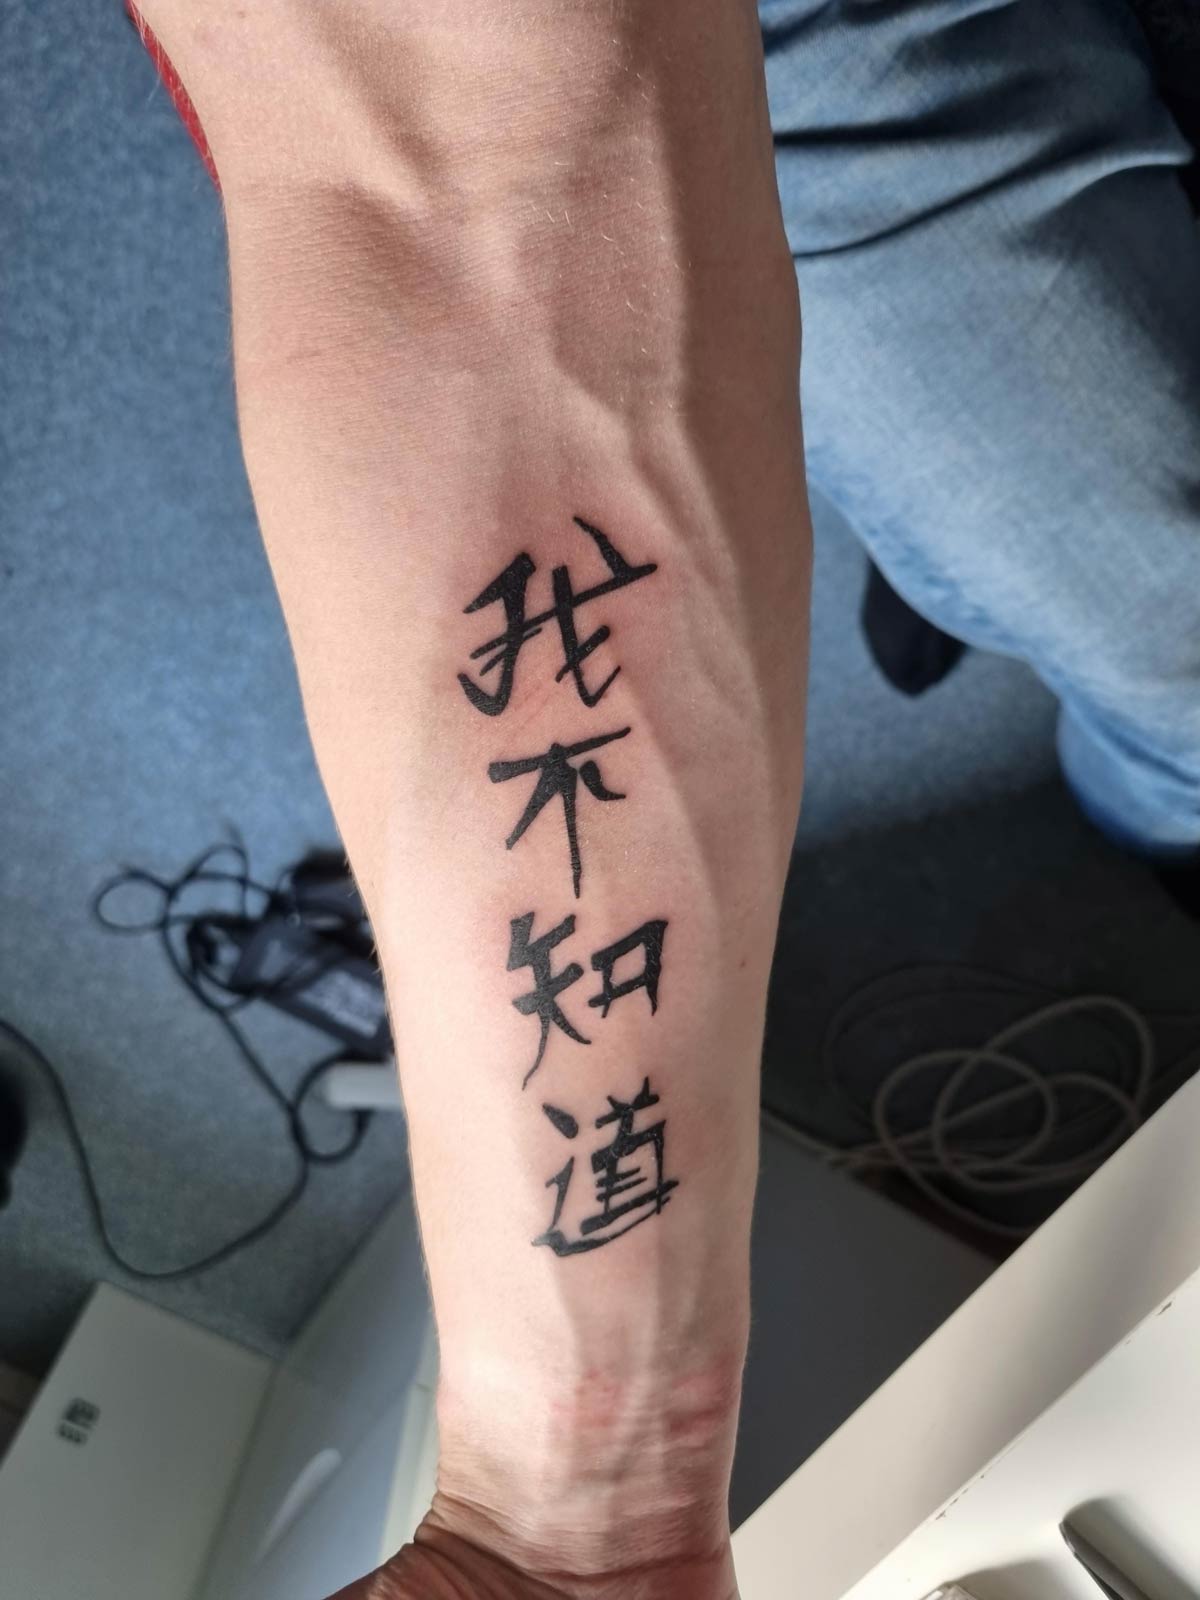 I got 'I don't know' in Chinese tattooed on my arm to confuse people who ask what my tattoo means